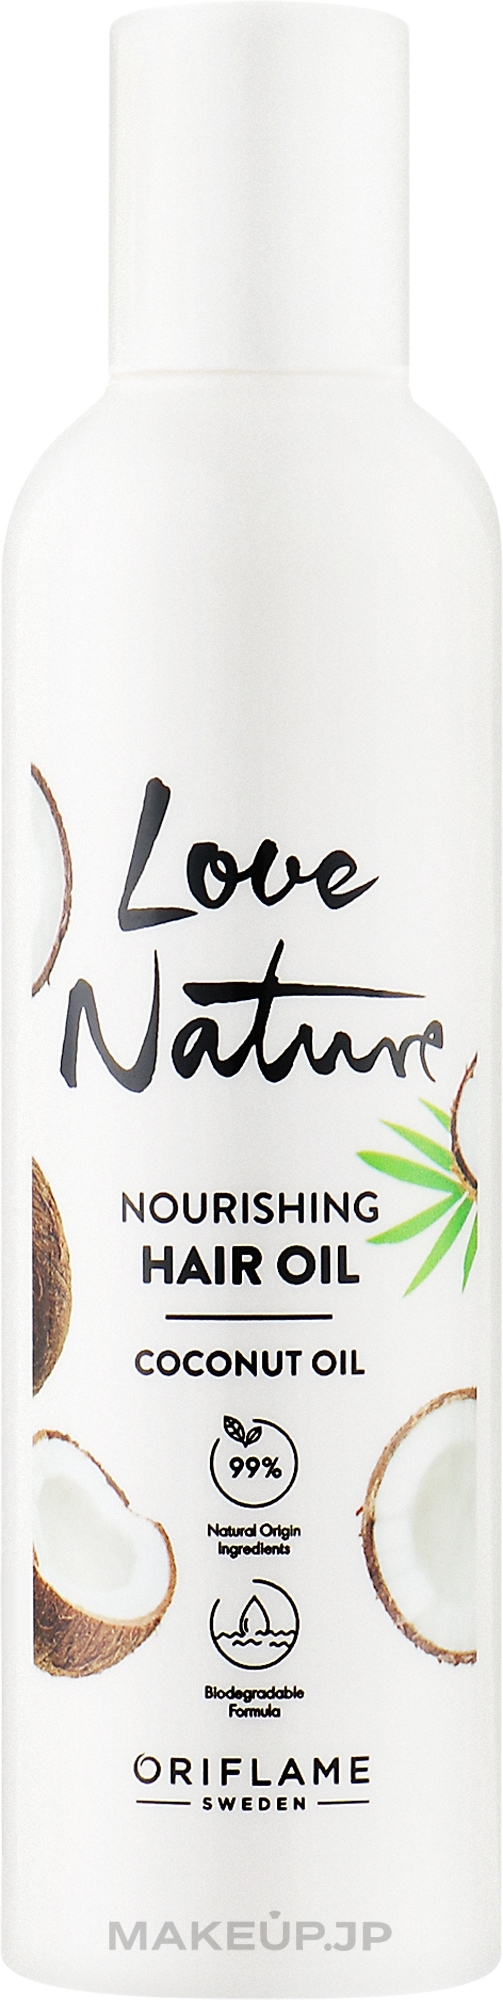 Nourishing Hair Oil with Coconut Oil - Oriflame Love Nature Nourishing Hair Oil Coconut Oil — photo 100 ml